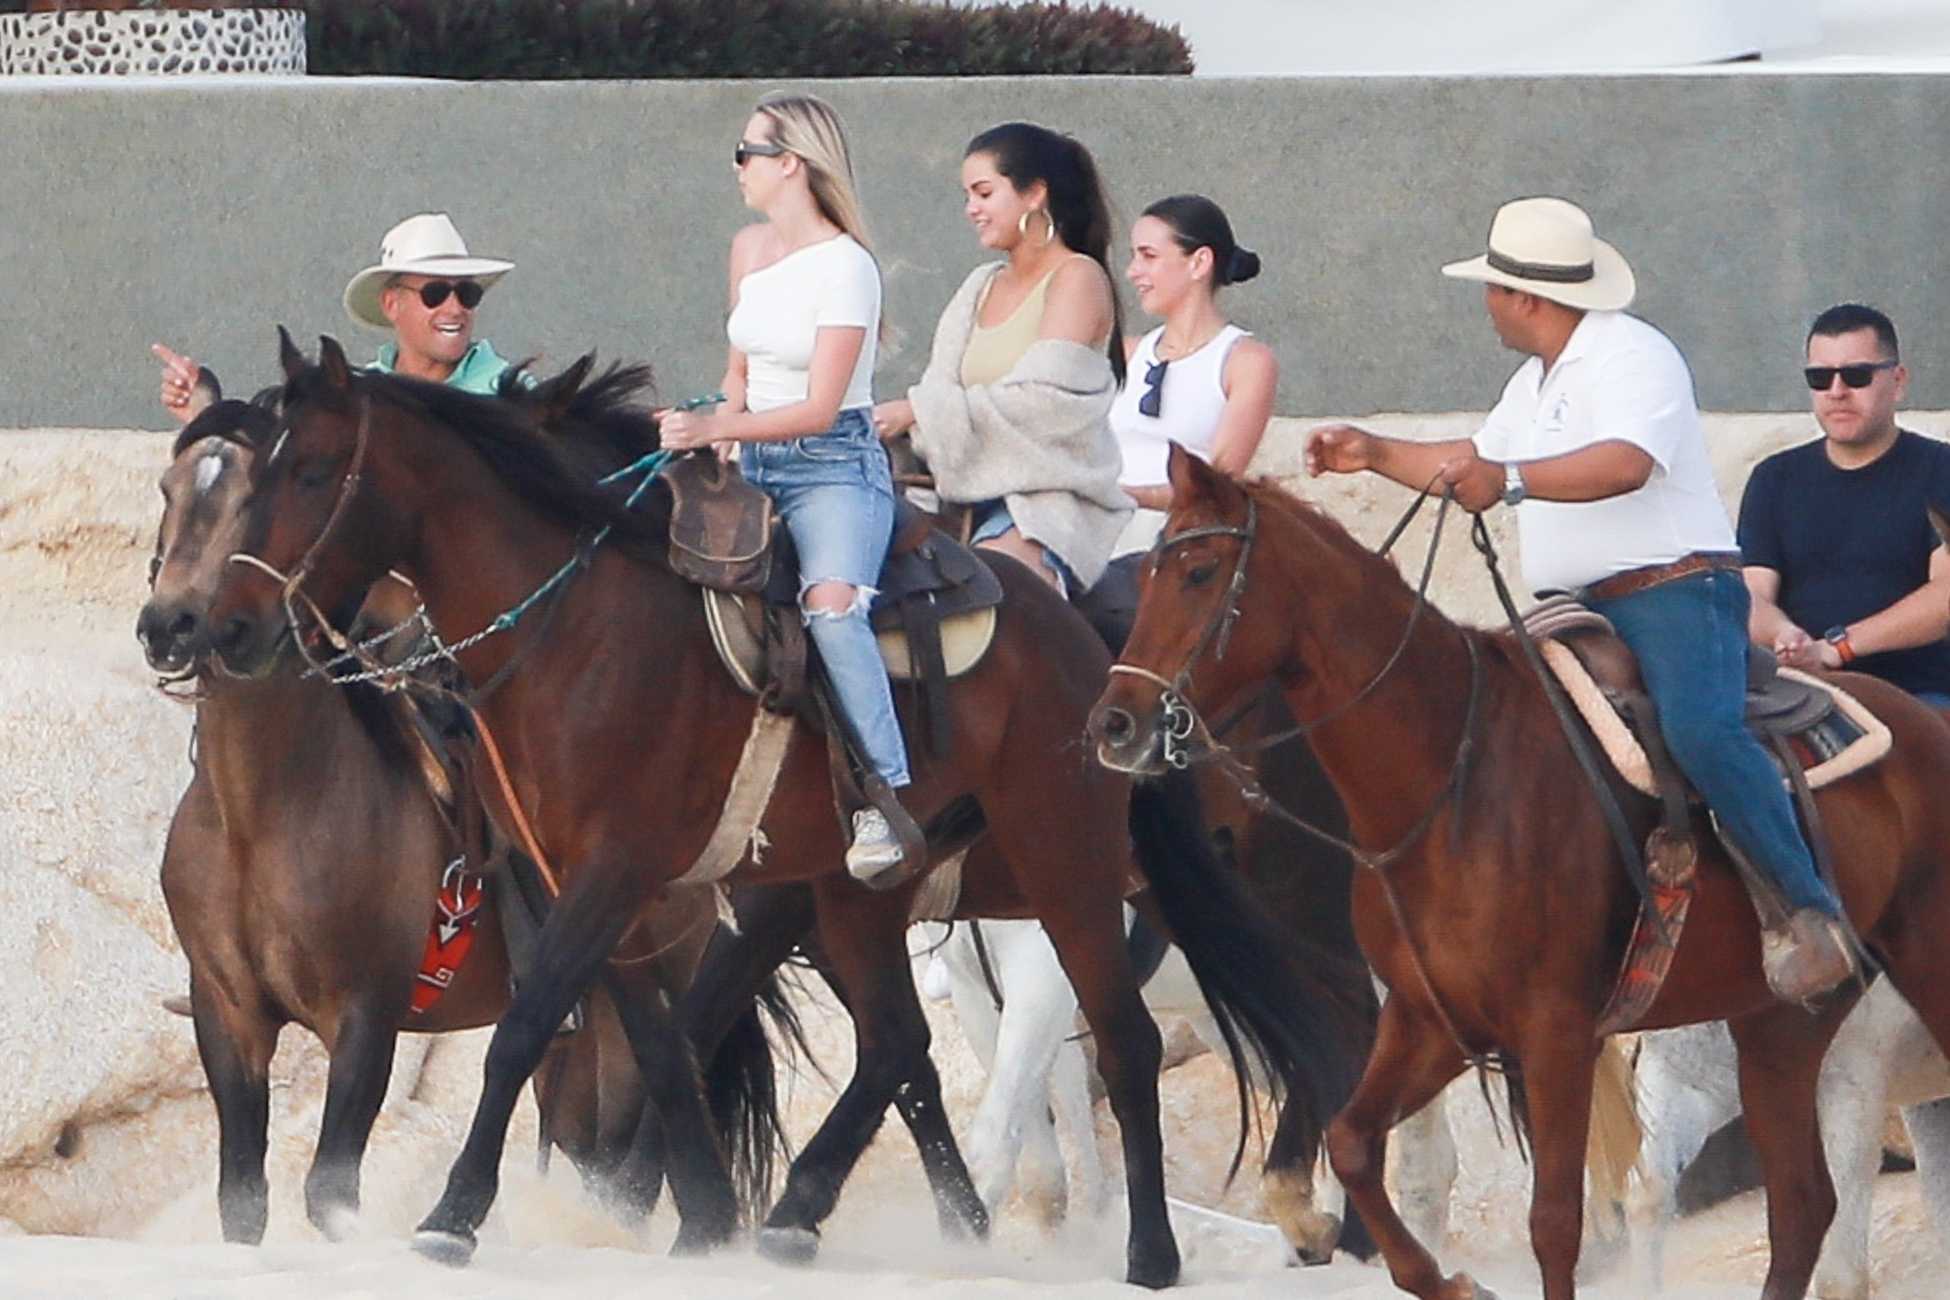 Selena_Gomez_-_Riding_a_horse_with_friends_in_Cabo_San_Lucas2C_Mexico_-_011119-03.jpg